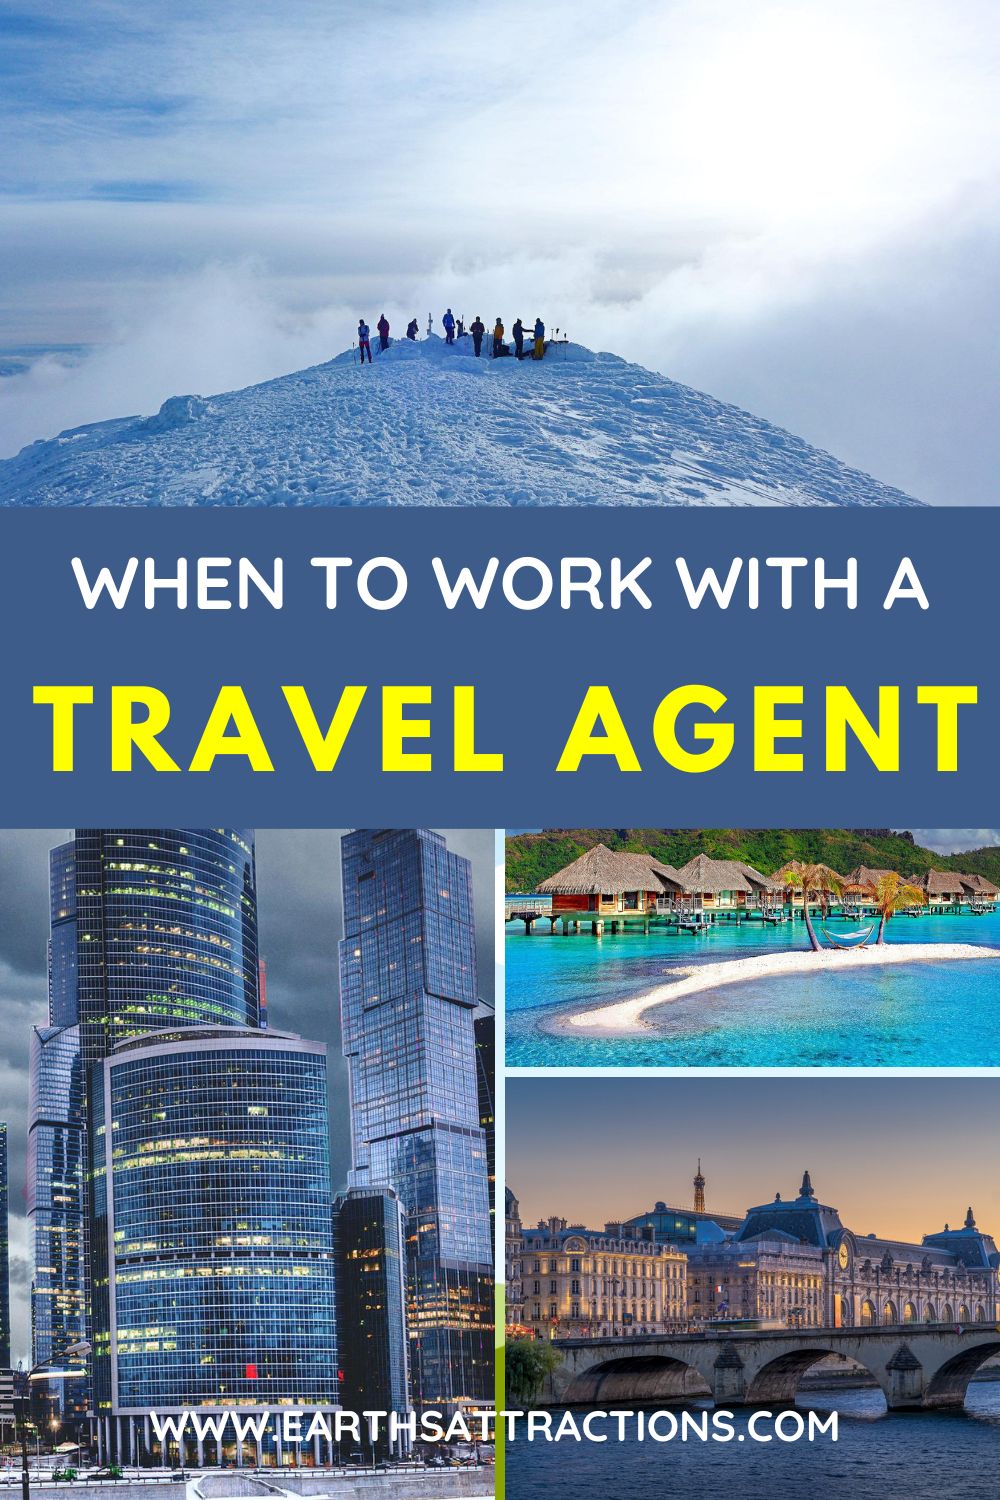 When to work with a travel agent. Discover when to use a travel agency for your next vacation. Top benefits of working with a travel agency  #travelplanning #travelagency #travelagent #traveltrips #traveltips #travedestination #vacationdestination #vacationtravel 